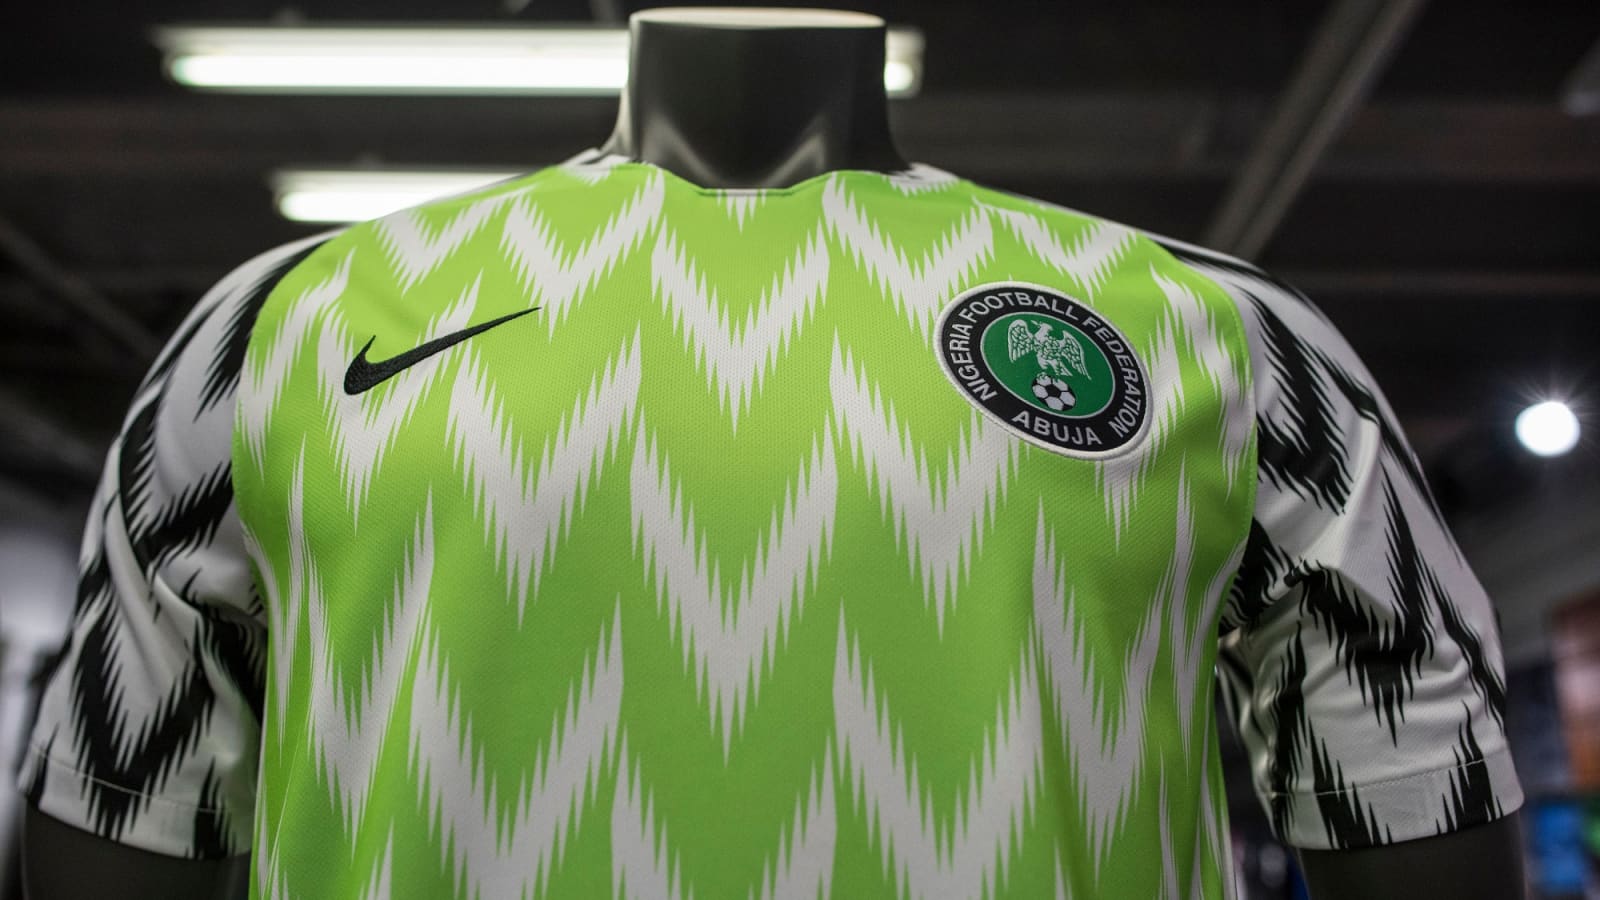 Sprout røg Trin Nike's Nigerian World Cup jersey breaks sales records